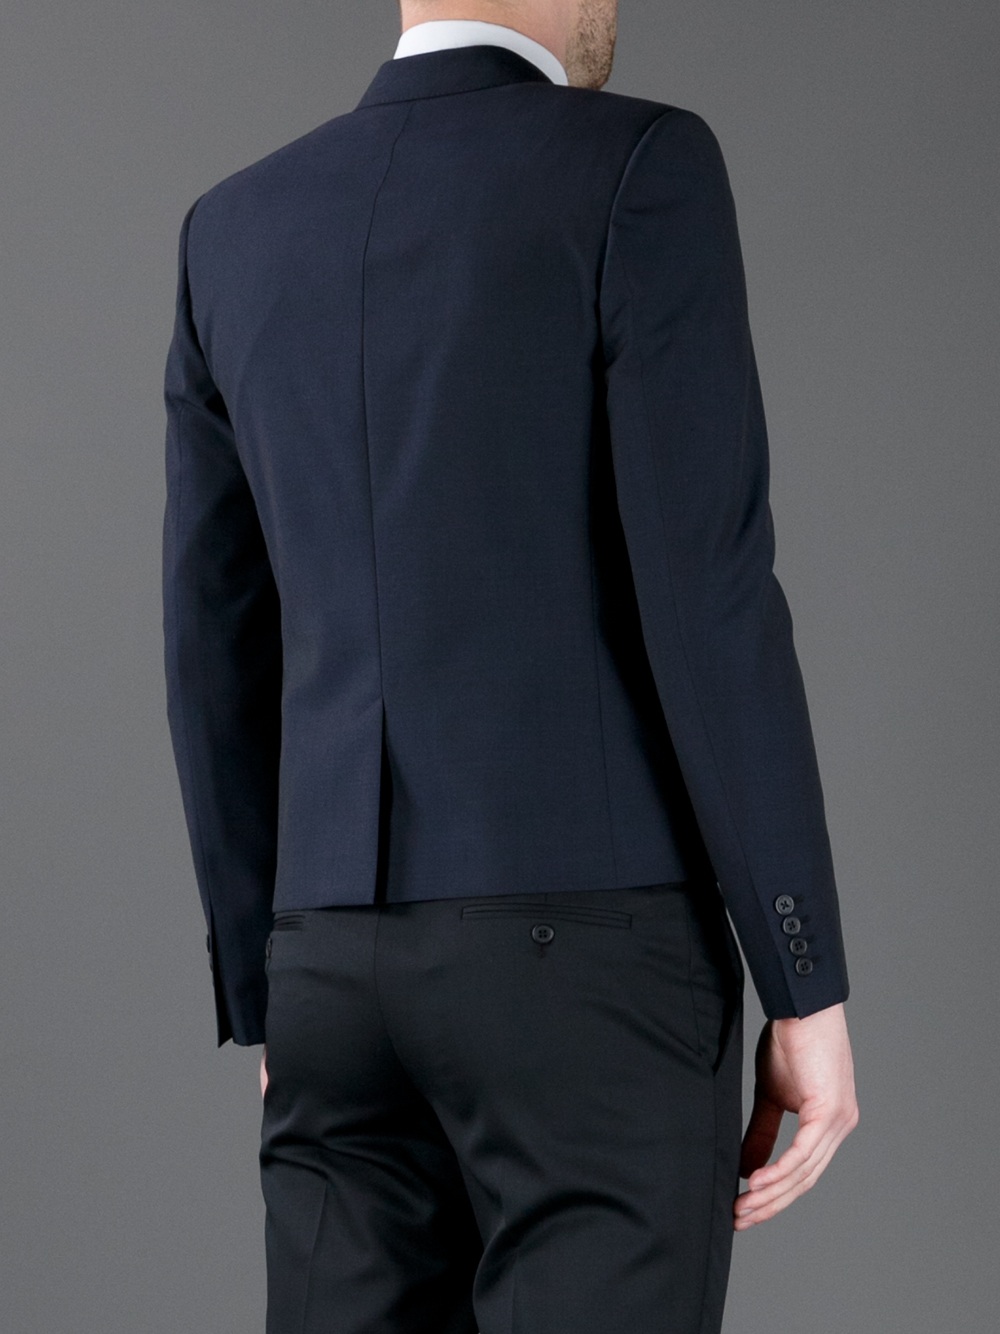 Saint Laurent Double Breasted Blazer in Navy (Blue) for Men - Lyst